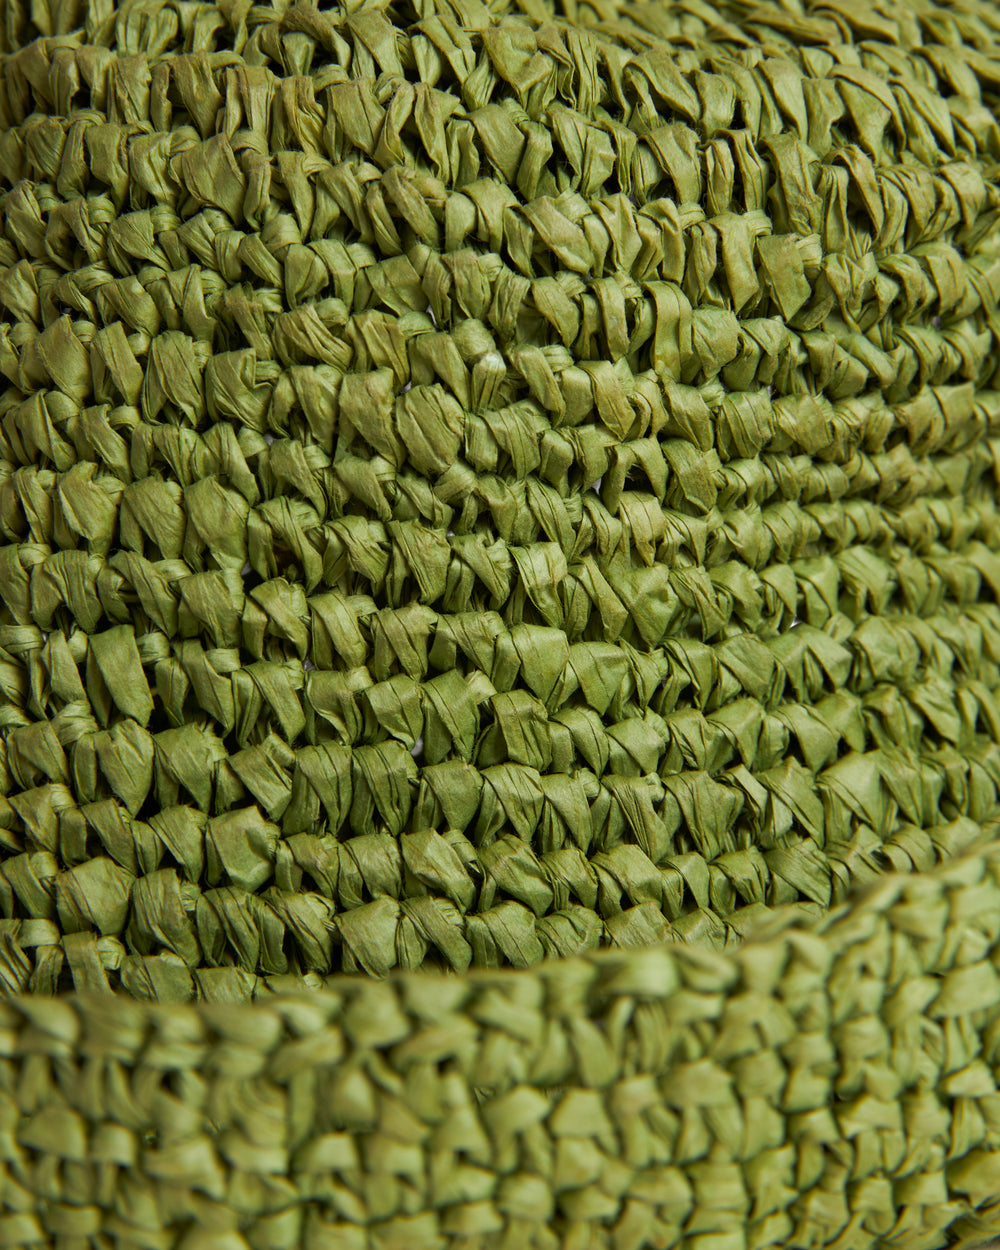 Close-up view of a textured surface made from closely woven green fibers, exhibiting a detailed and dense pattern of The Amabile Rafia Hat by Dandy Del Mar.